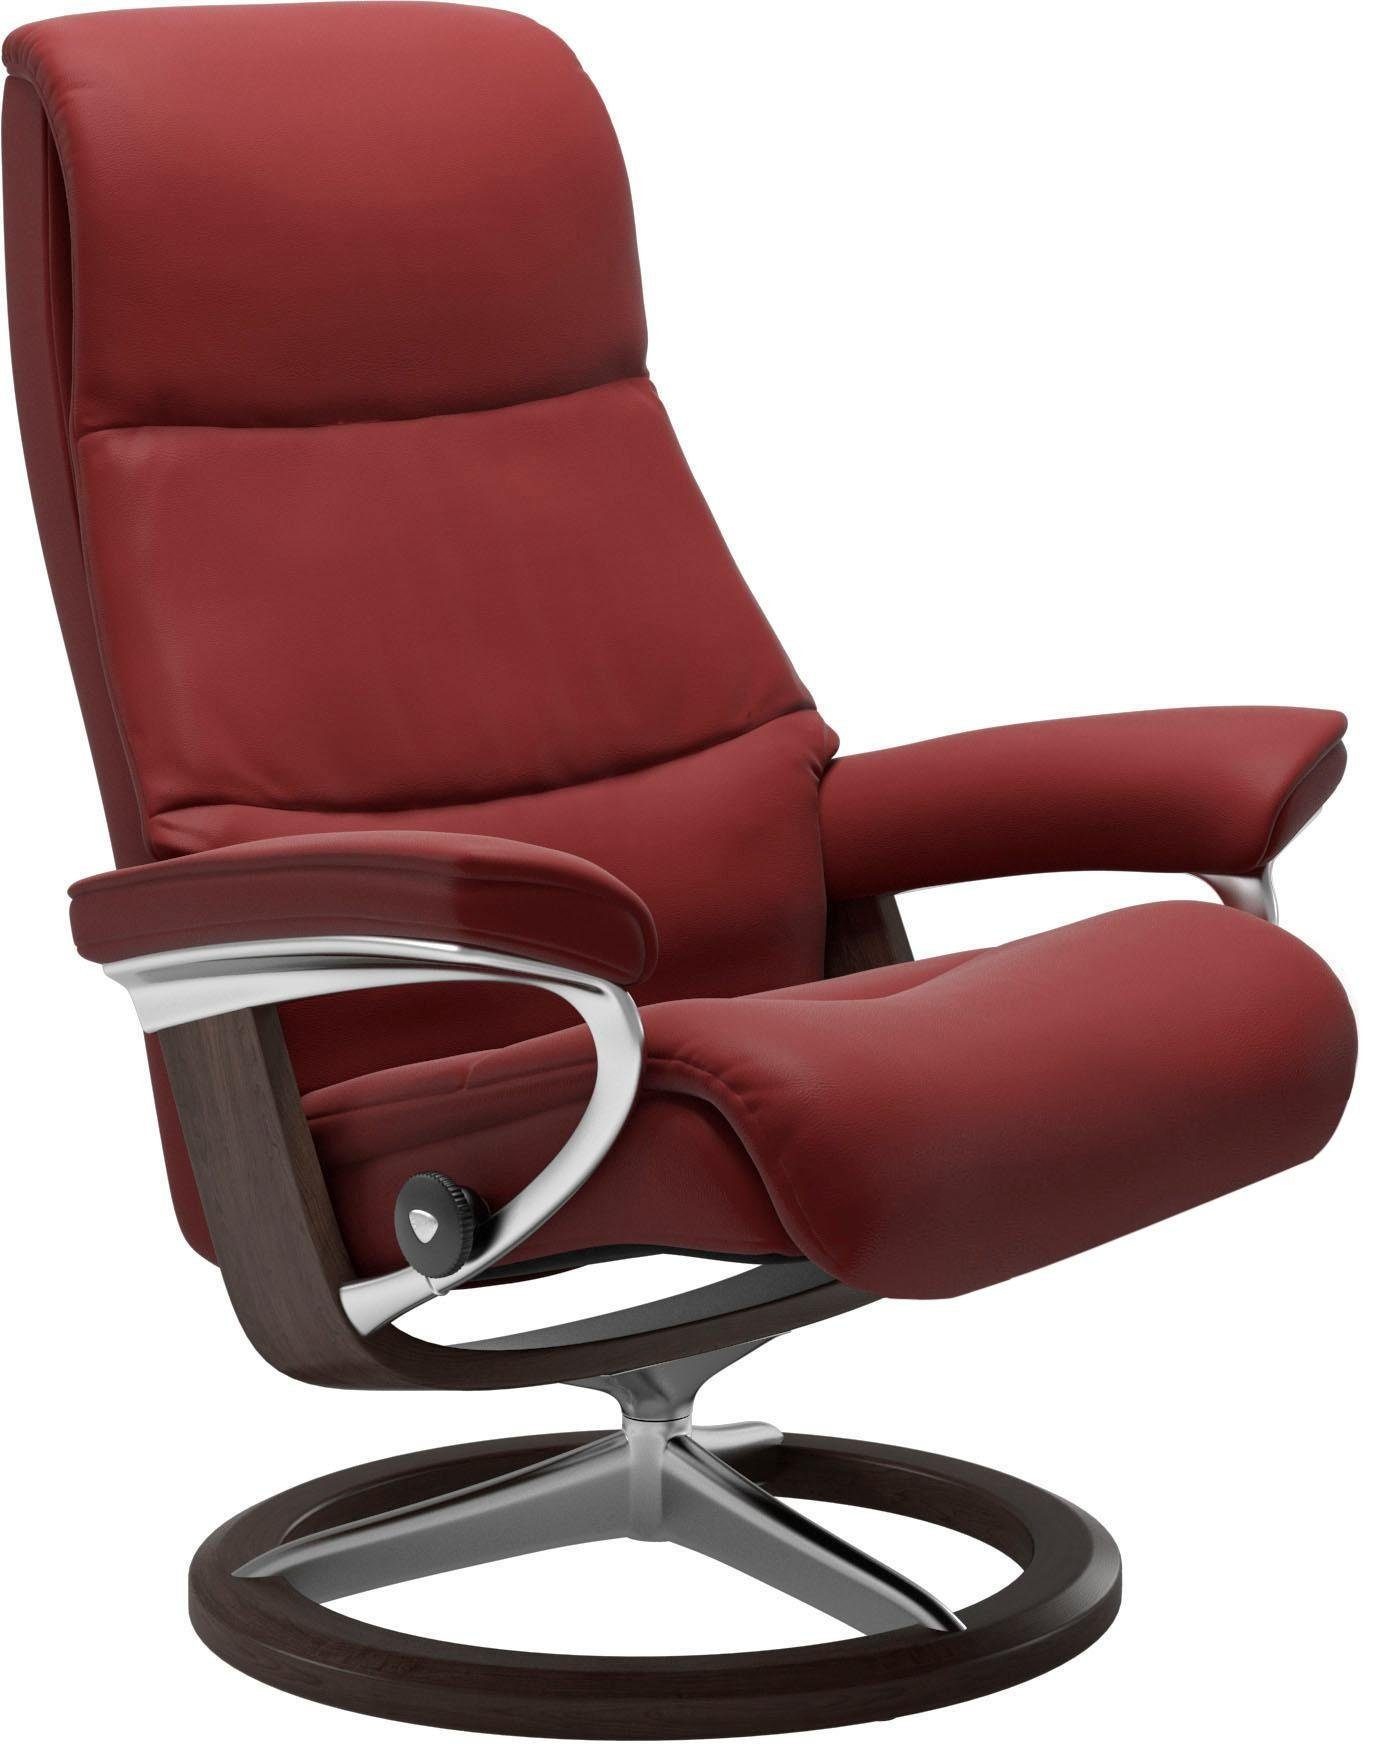 Größe Signature L,Gestell Stressless® View, Base, mit Relaxsessel Wenge